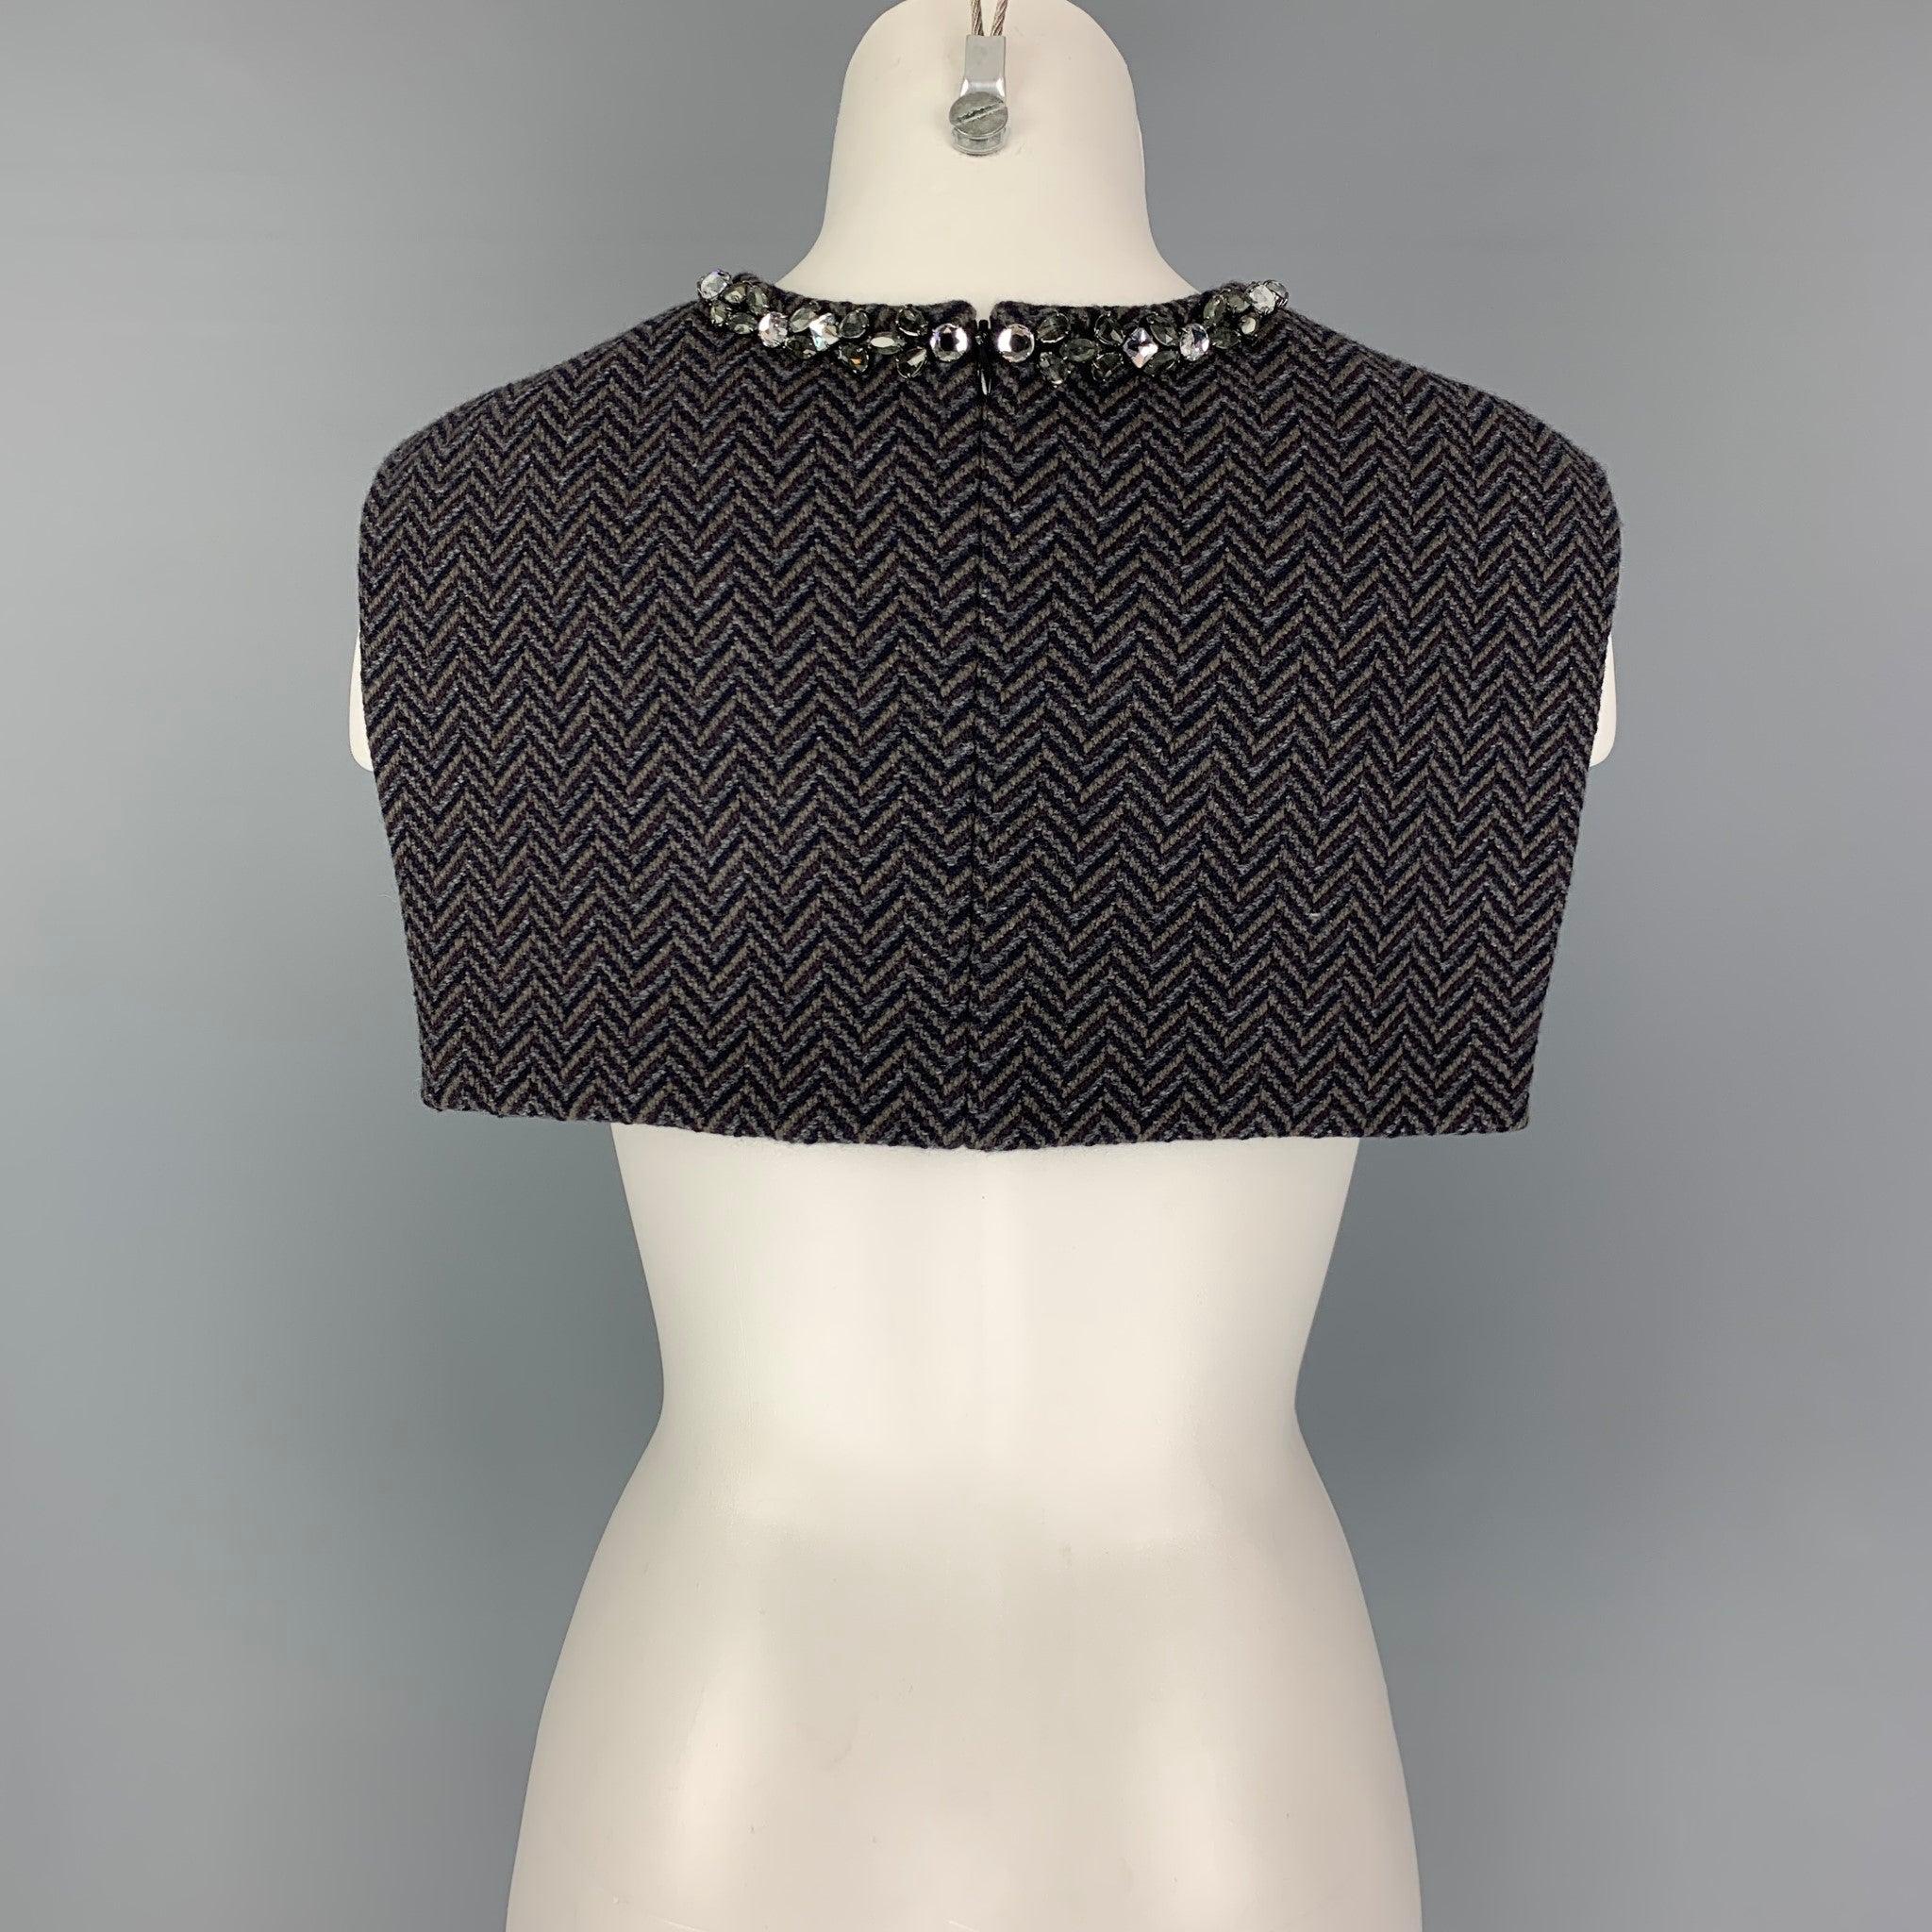 PORTS 1961 Size 4 Gray Navy Herringbone Fleece Wool Polyamide Dress Top In Good Condition For Sale In San Francisco, CA